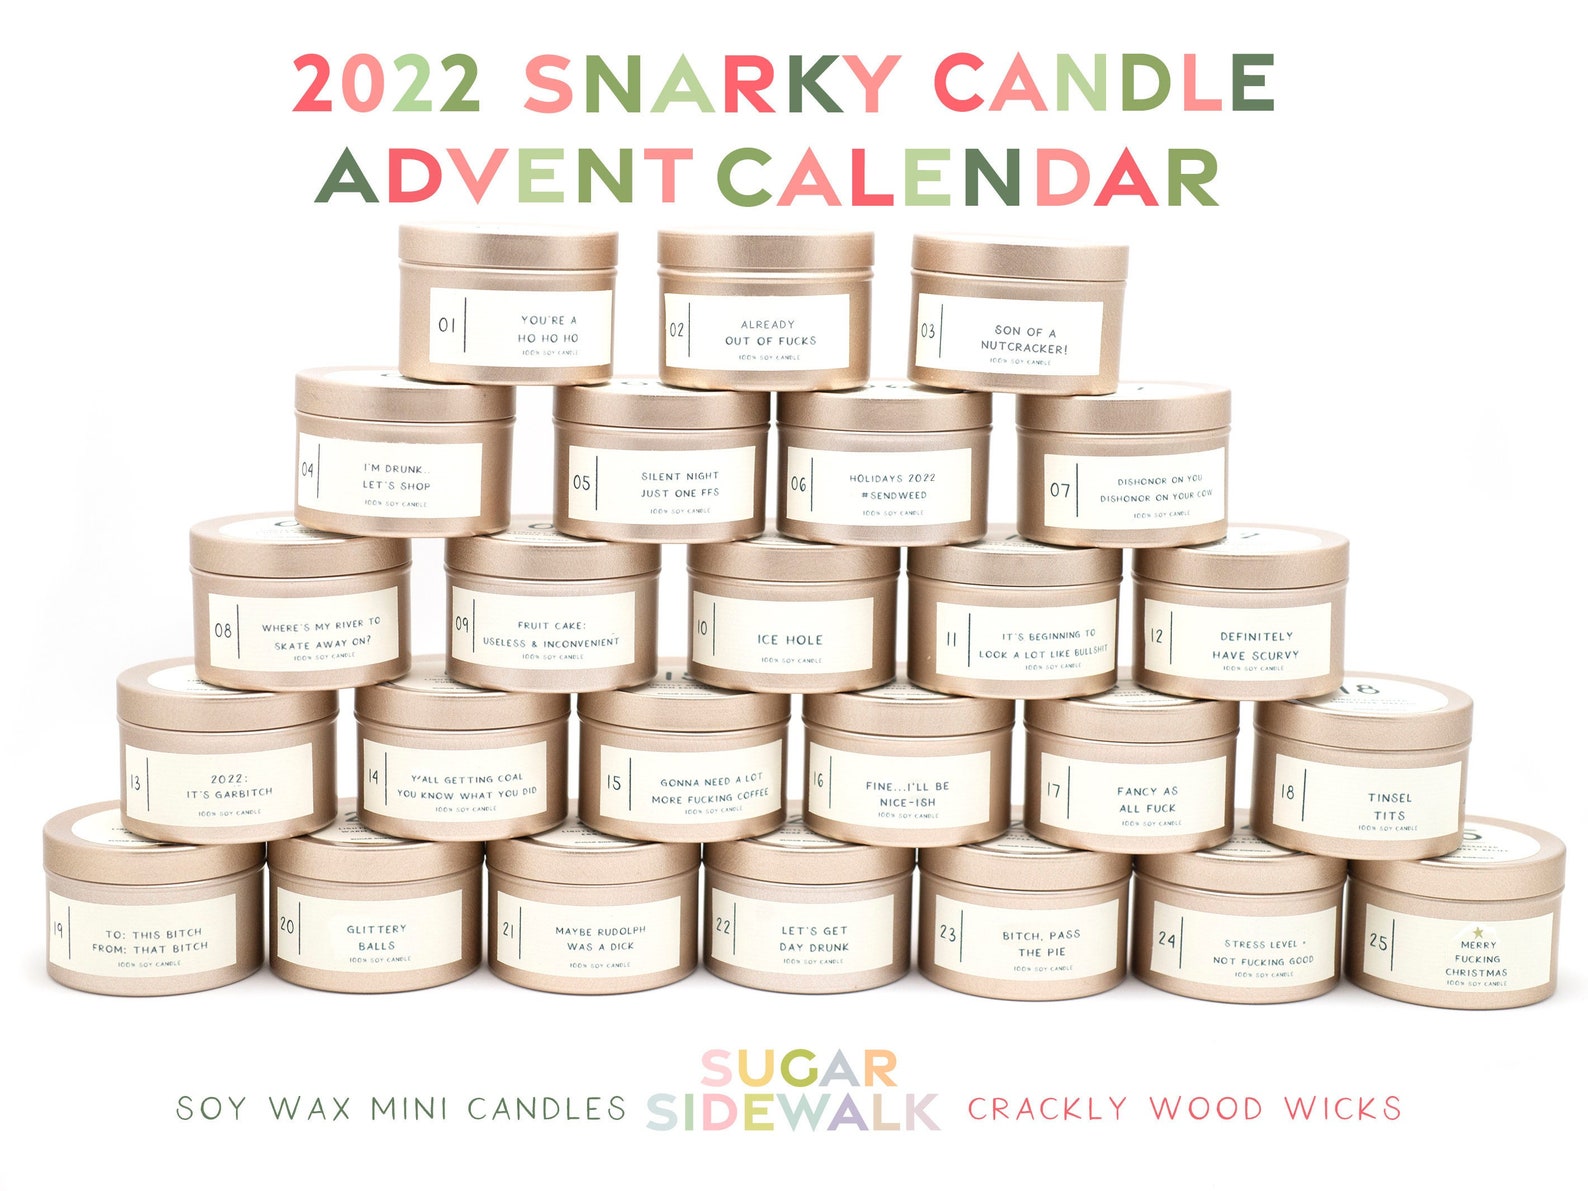 Advent Candle Calendar • 2021 Christmas Candles • Funny Swear Word Candles • Unique Advent Calendar • SHIPS PRIORITY MAIL